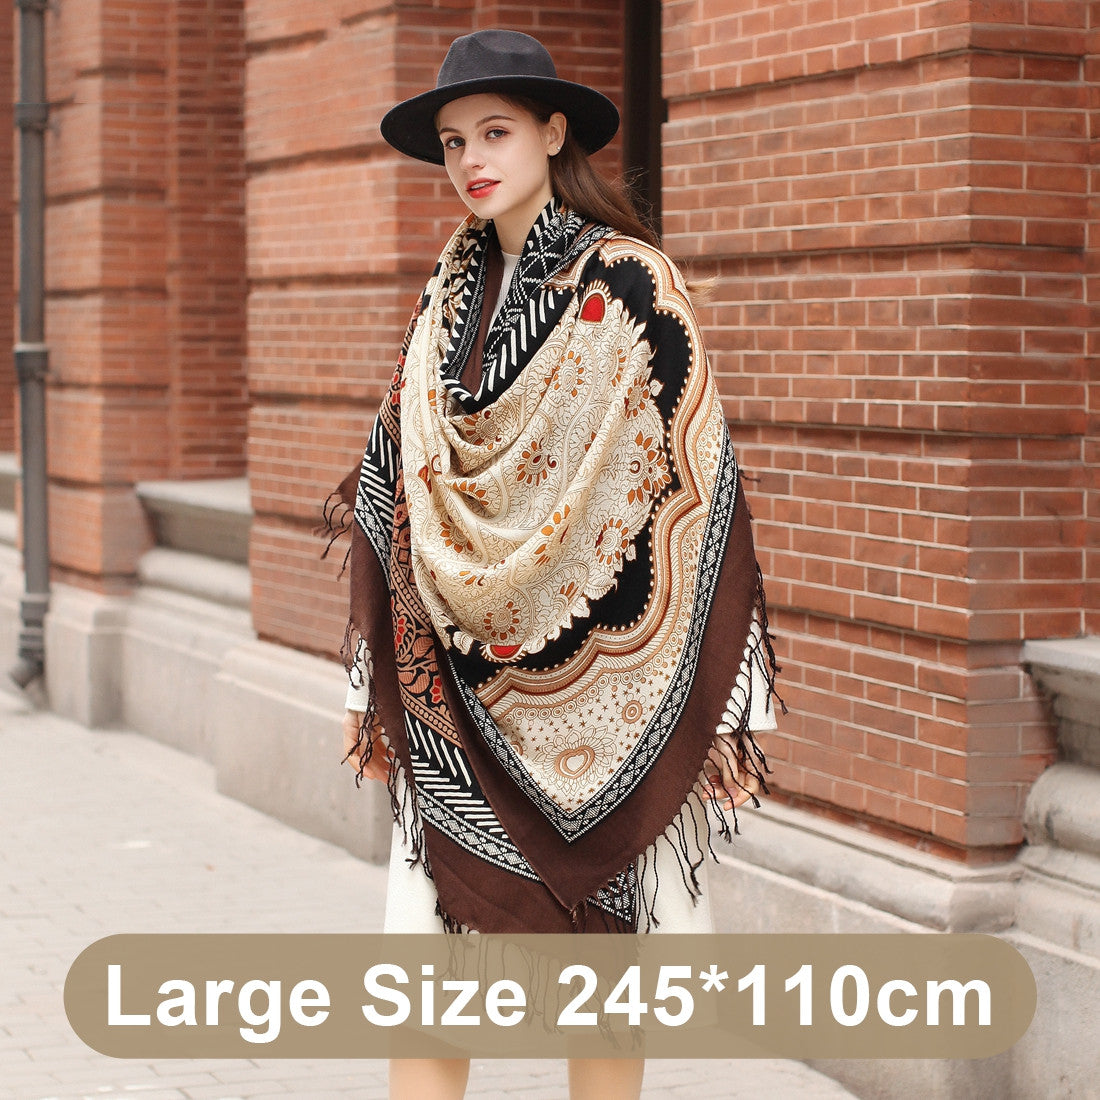 Oversized Women's Wool Cape - Multifunctional Ethnic Elegance with Plants and Flowers Pattern in Rich Brown - FlaxLin Eco Textiles